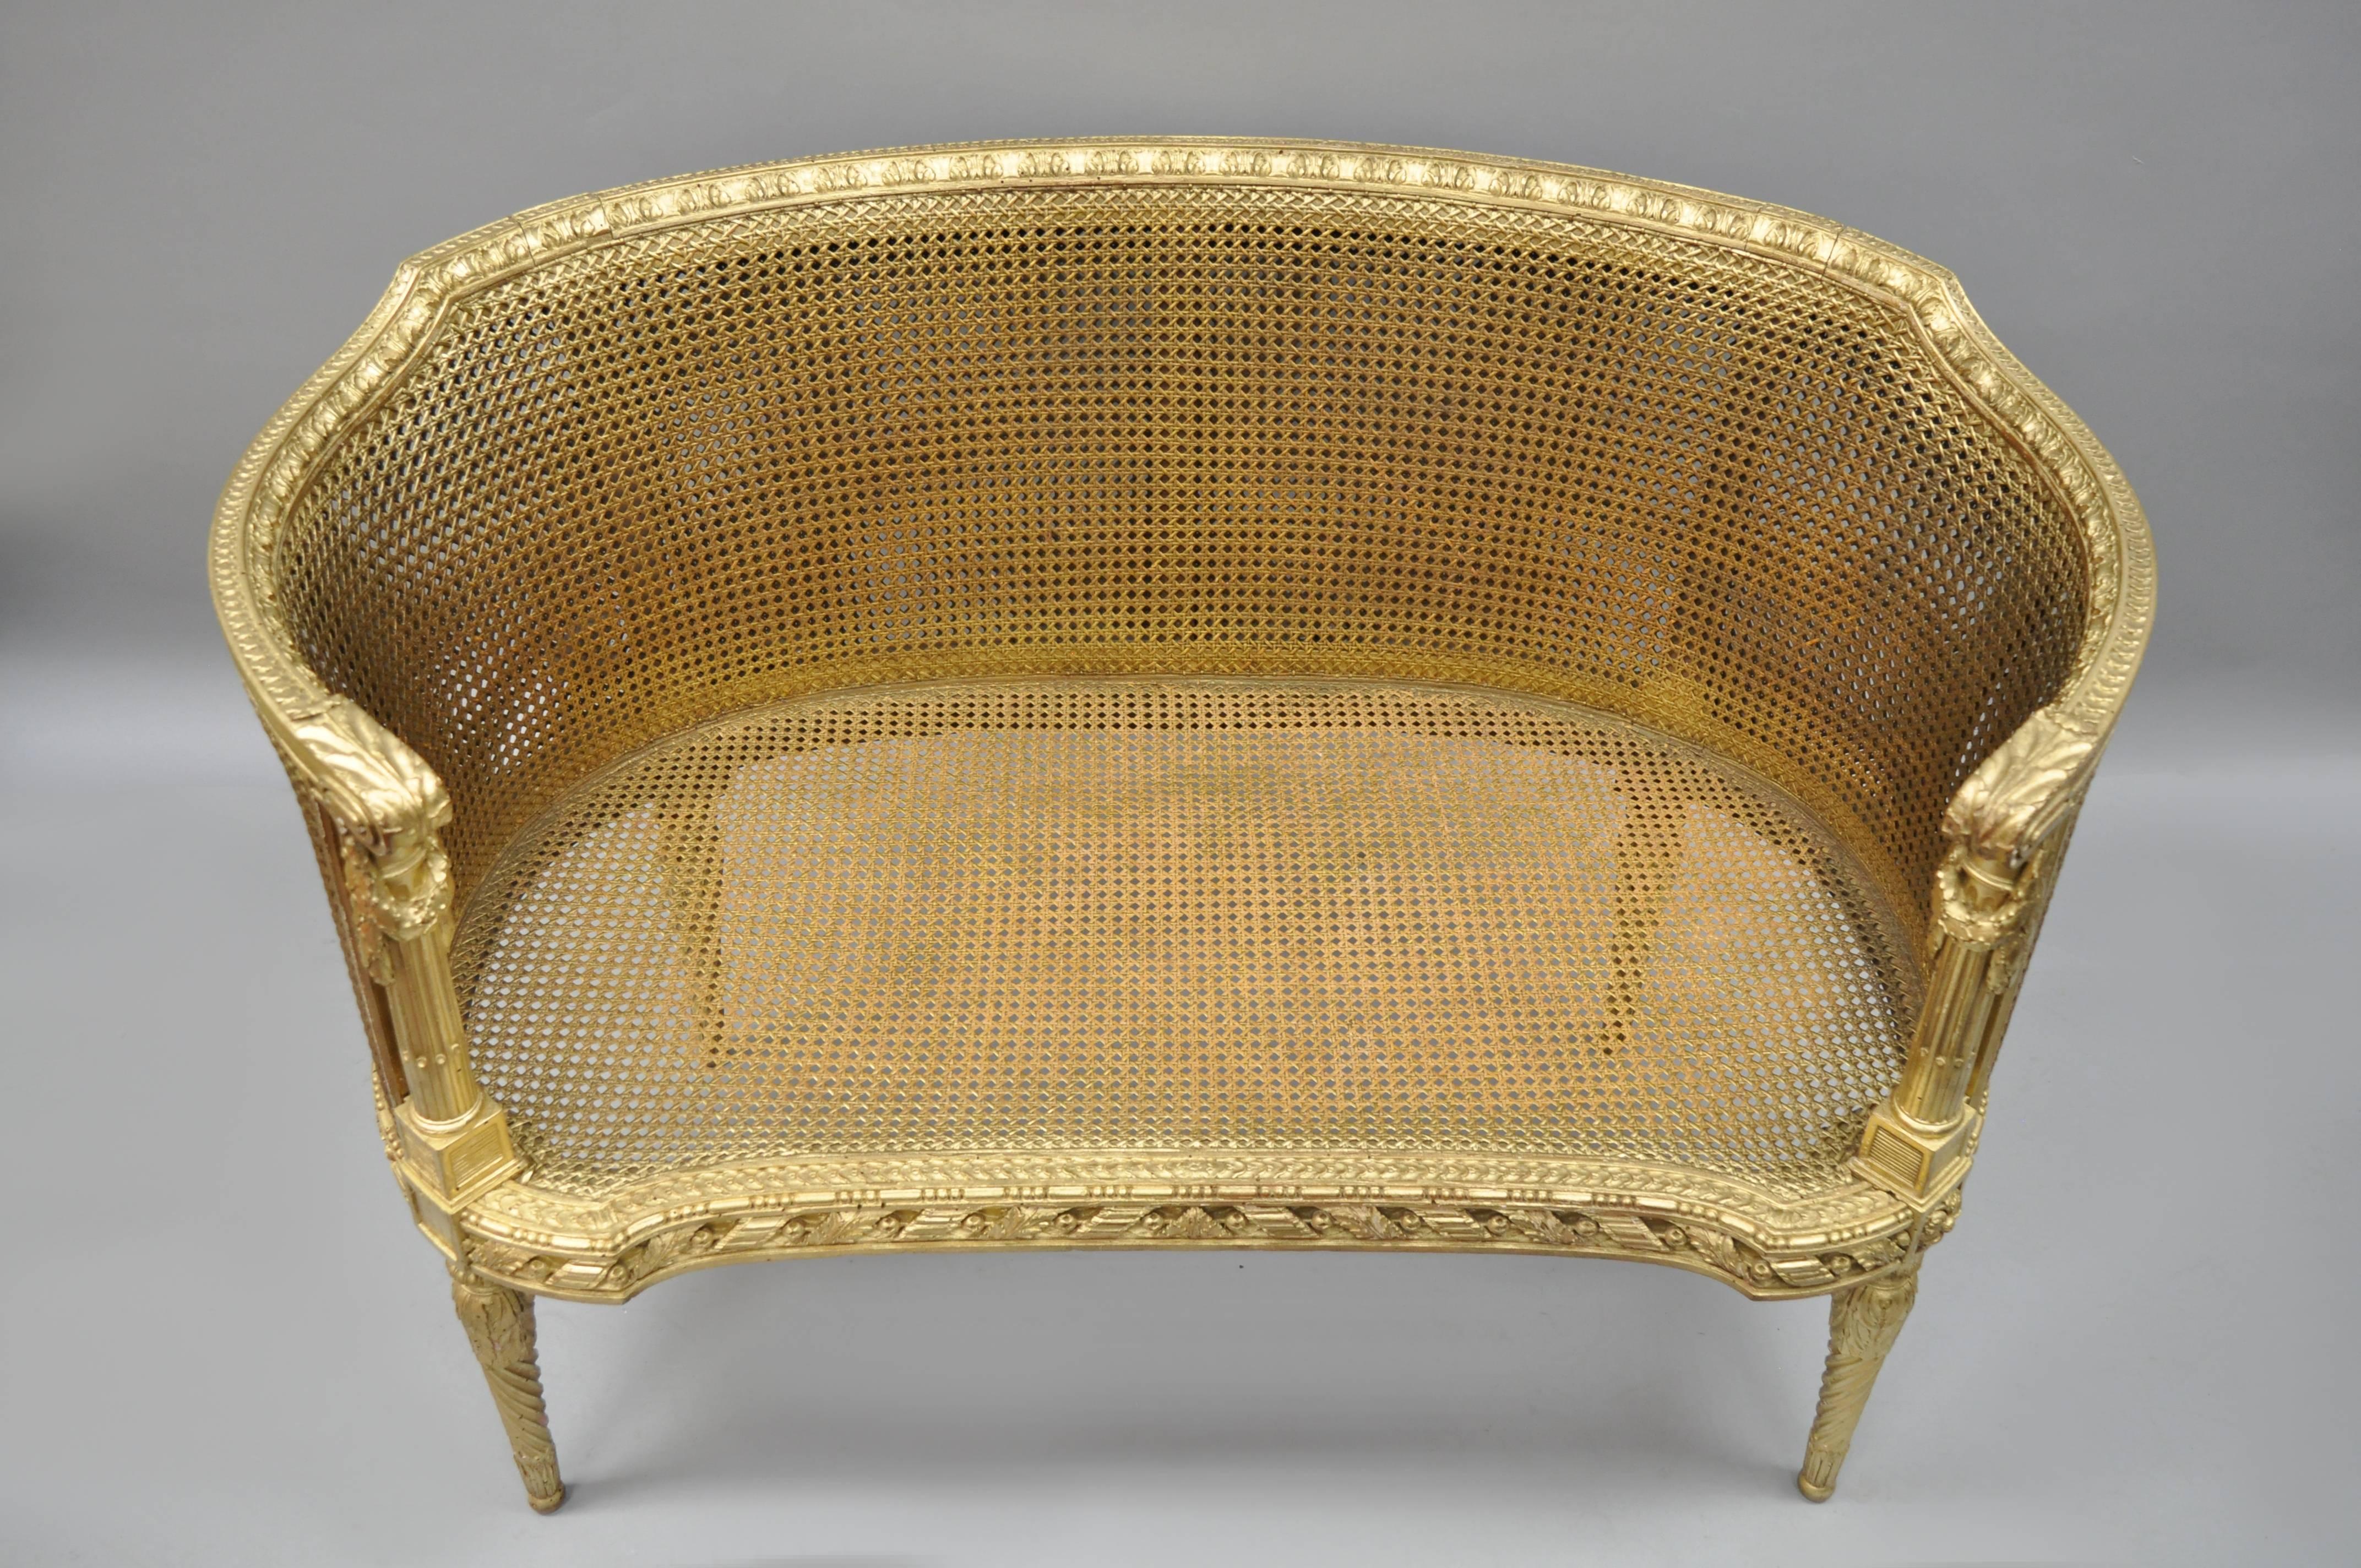 Antique French Louis XVI Style Gold Cane Giltwood Oval Settee Loveseat Bench 7